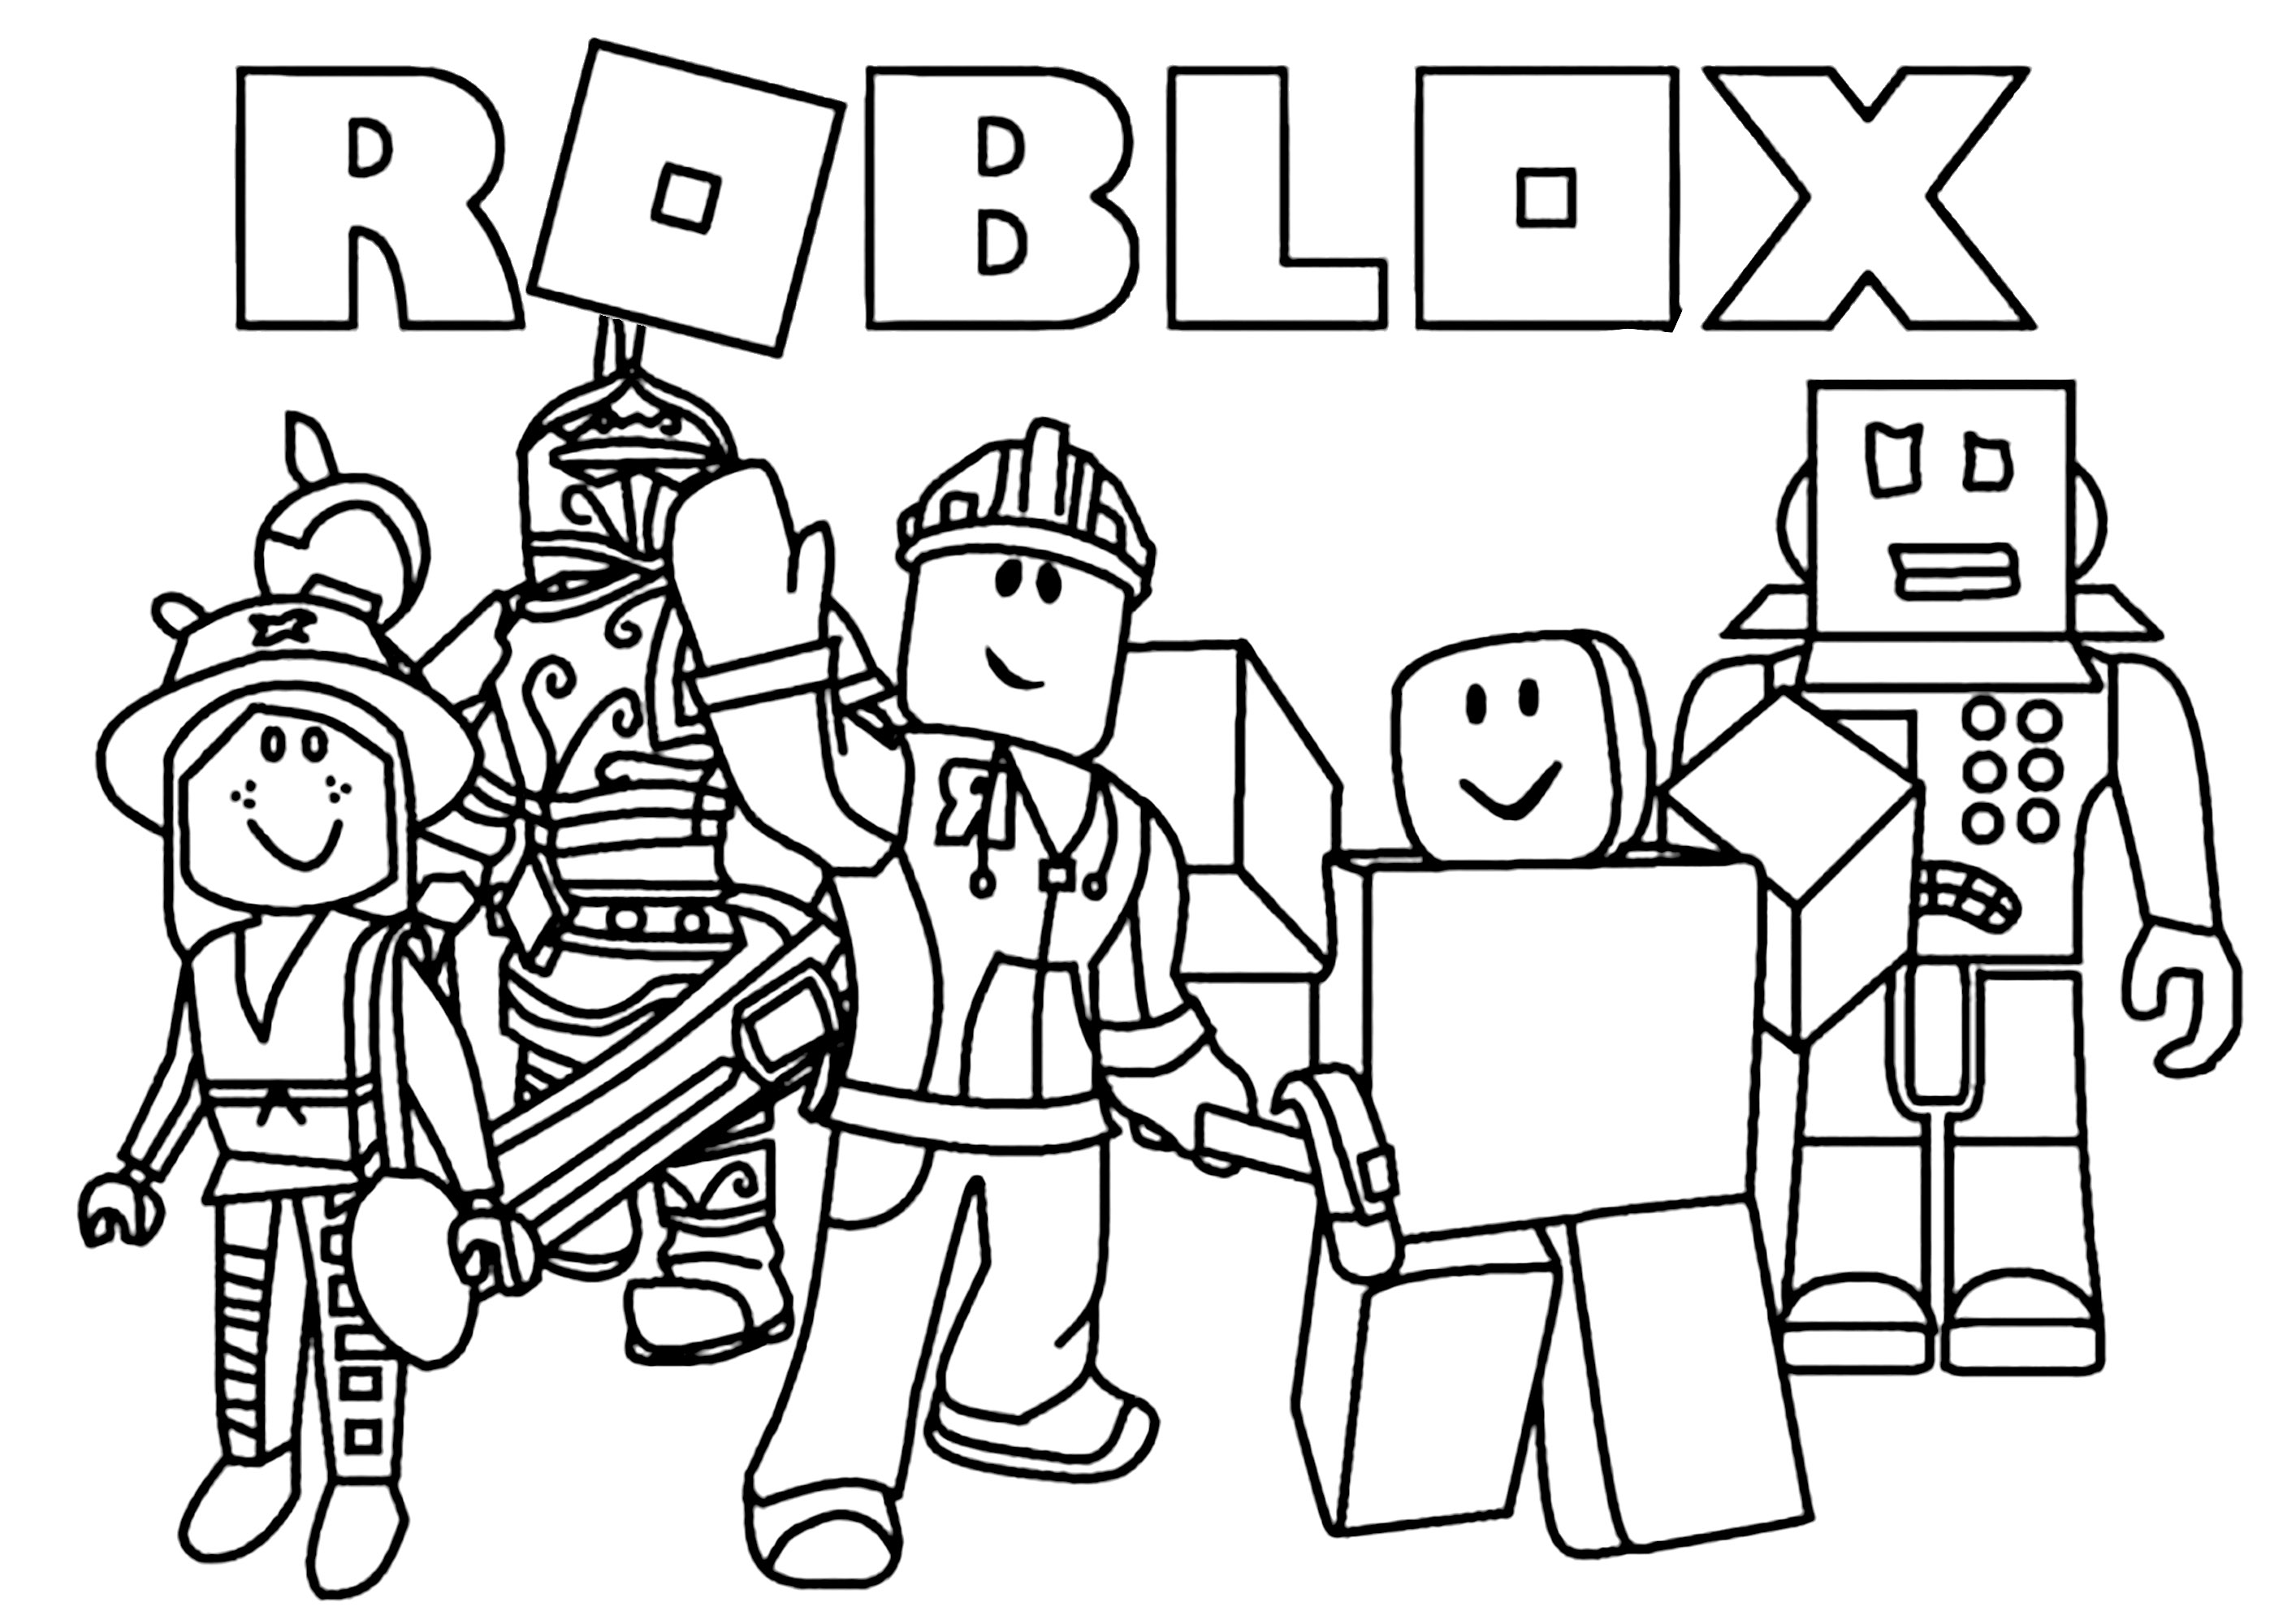 Roblox and Logo characters - Roblox Kids Coloring Pages